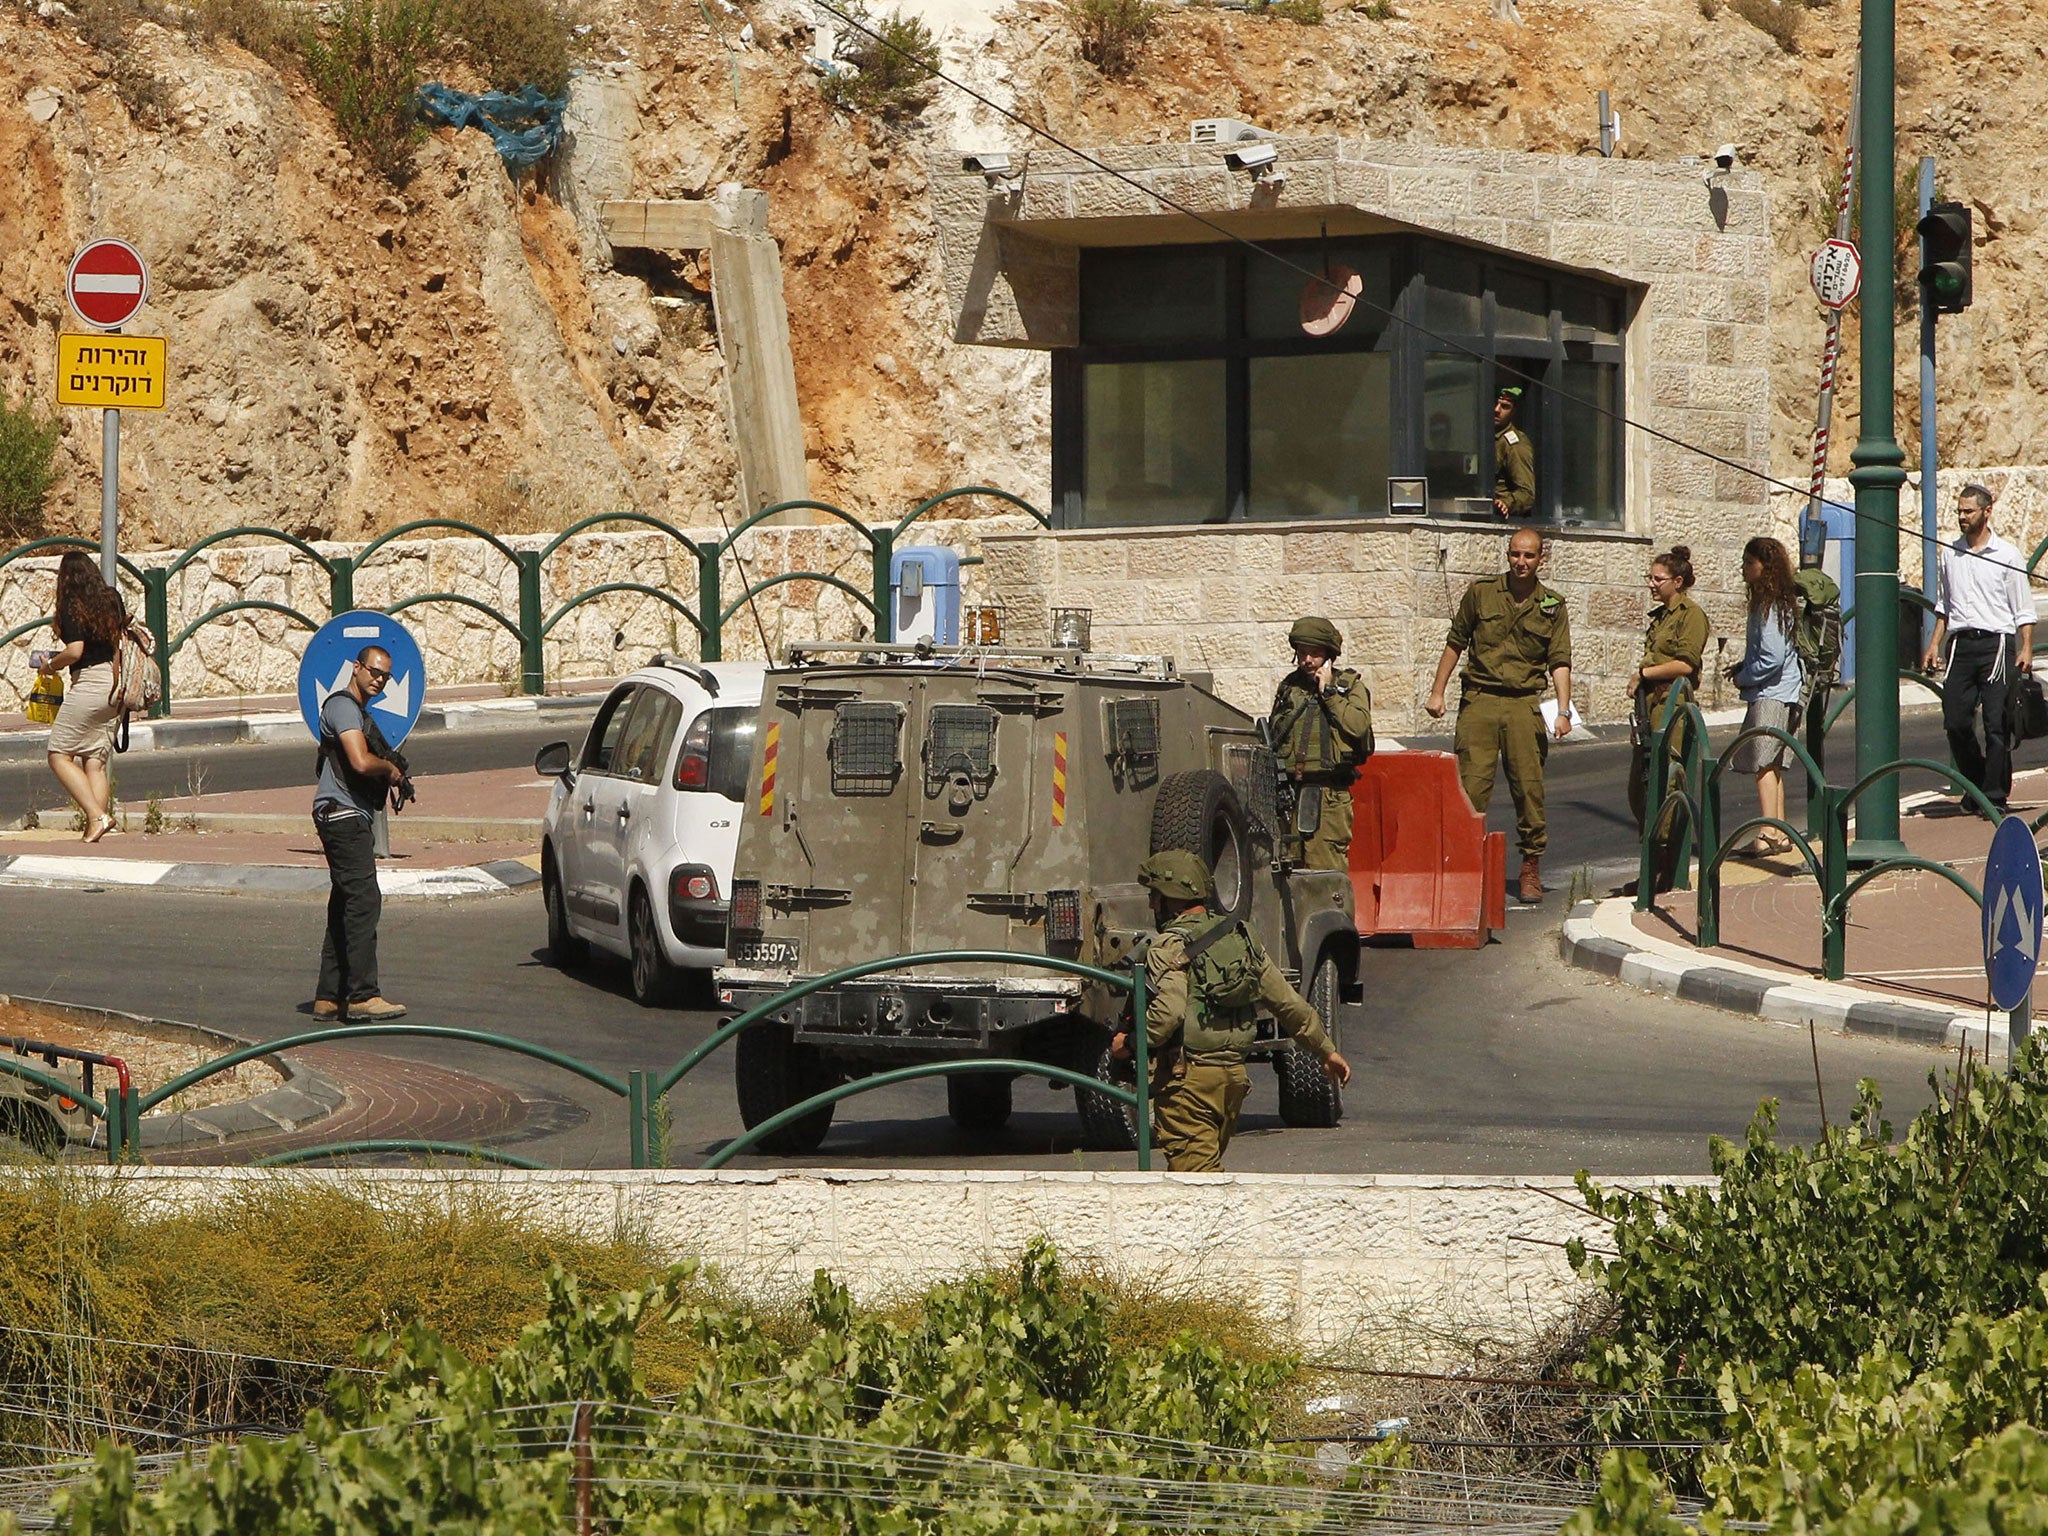 &#13;
Israeli security forces gather at the Jewish settlement of Kiryat Arba last month, after a 13-year-old Israeli girl was fatally stabbed in her bedroom (AFP/Getty)&#13;